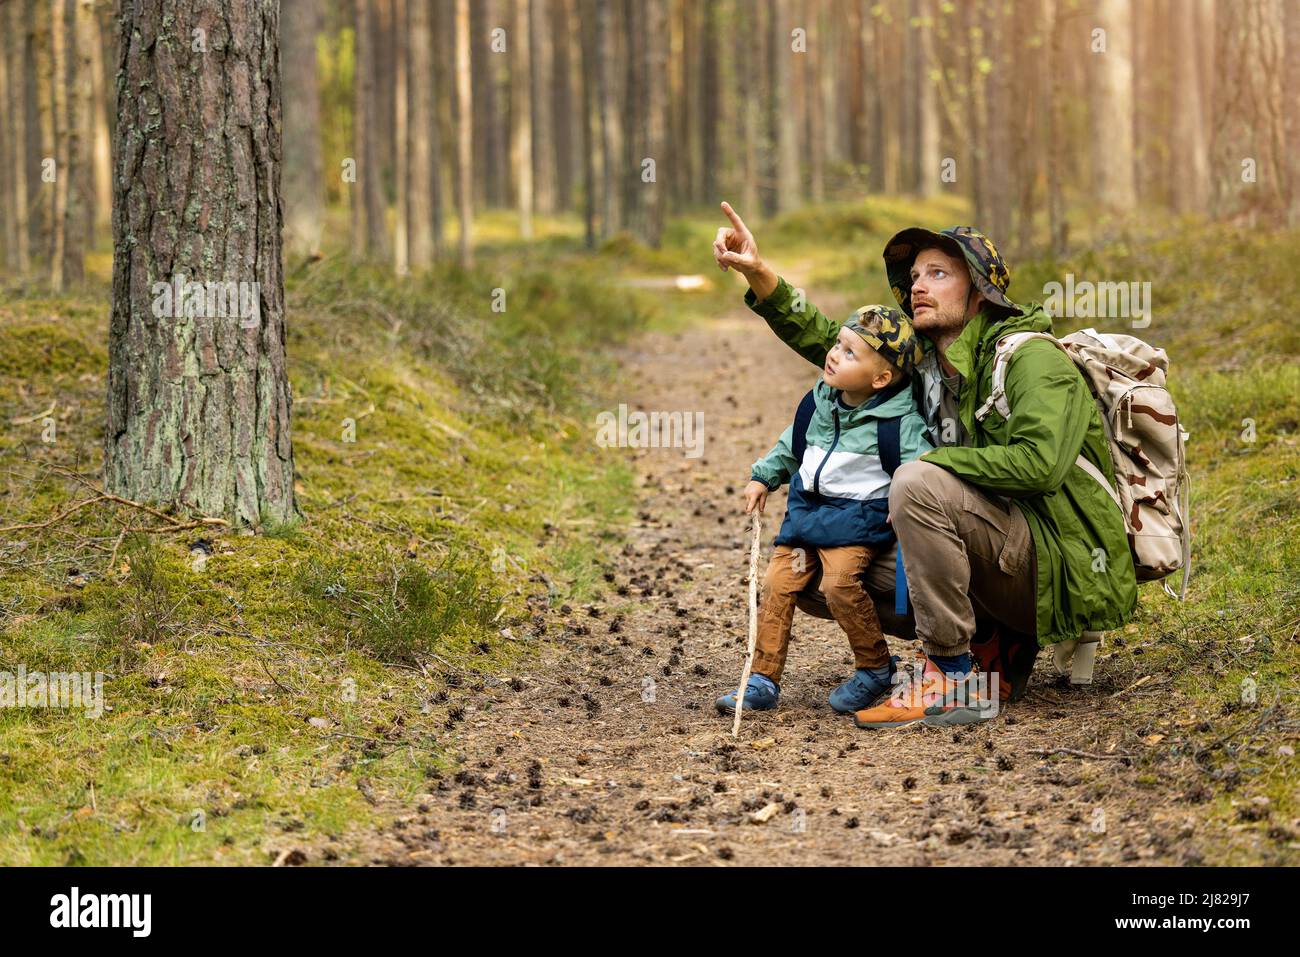 father and son adventure hike. exploring forest together. bonding activities Stock Photo